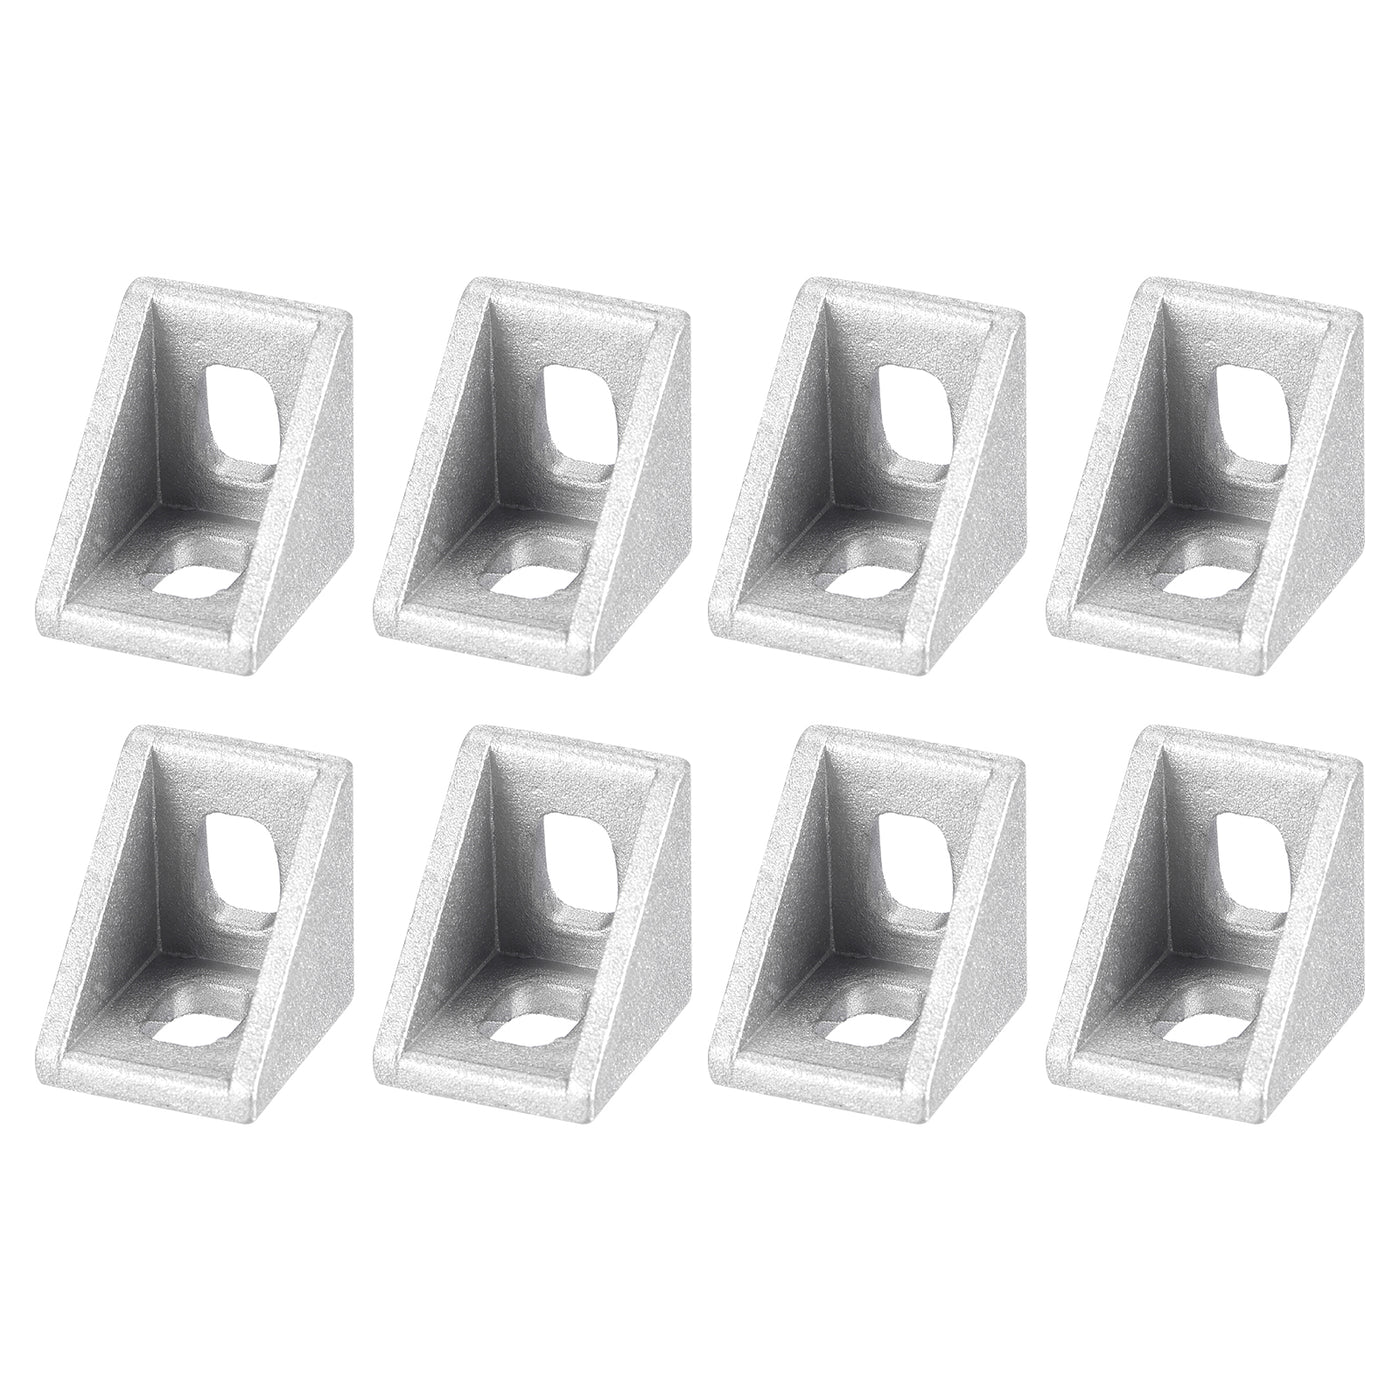 uxcell Uxcell 8Pcs Inside Corner Bracket Gusset, 20x20x17mm 2020 Angle Connectors for 2020 Series Aluminum Extrusion Profile Silver